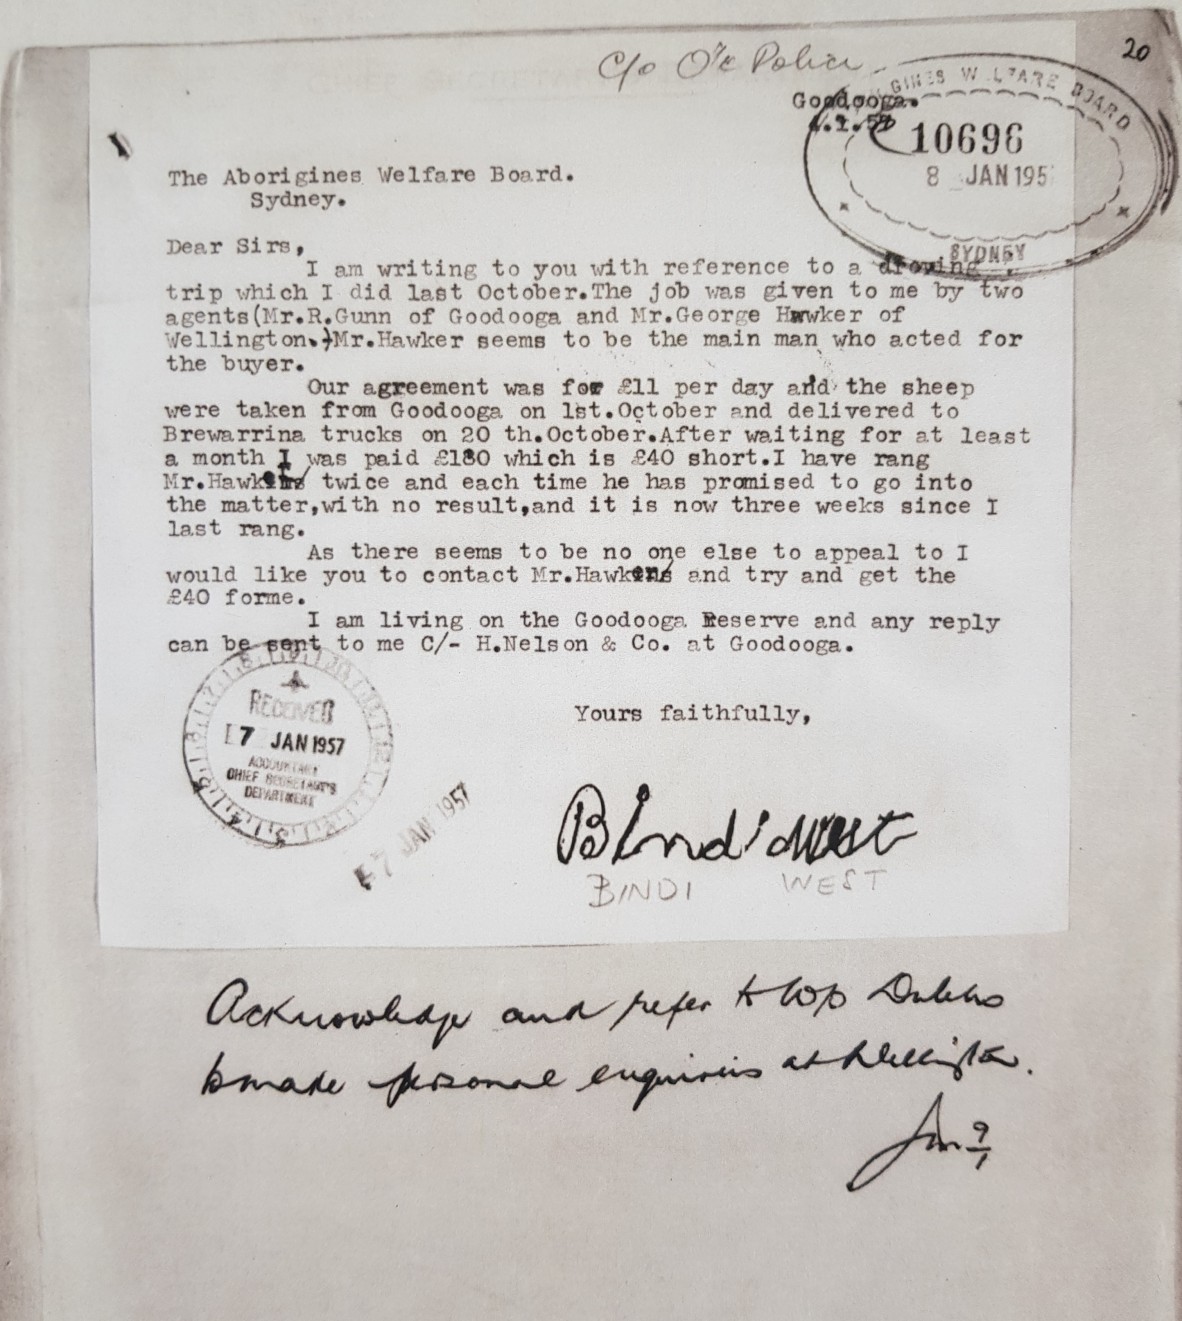 The Initial letter from Bindi West addressed to the Aborigines Welfare Board, Sydney, on 8th Jan 1957.